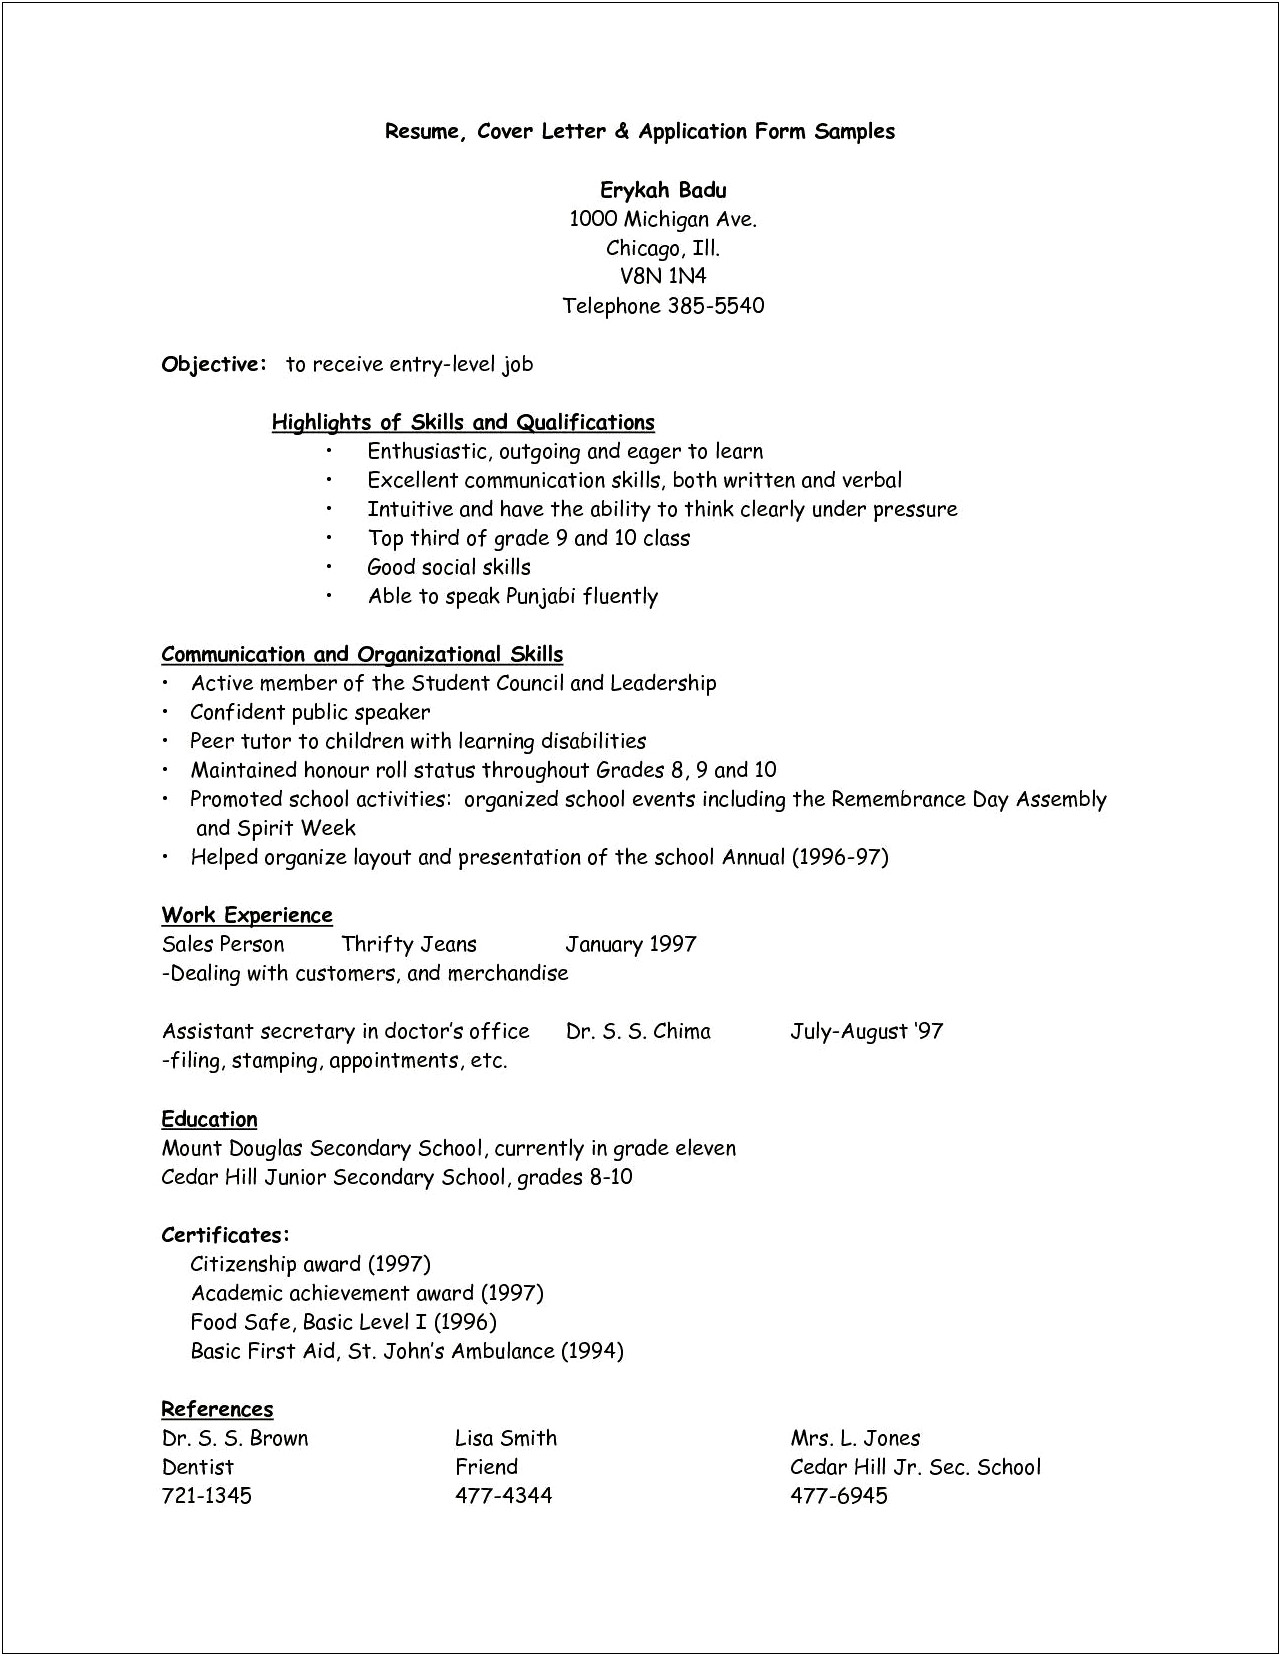 Chromabase Resume Cover Letter Examples